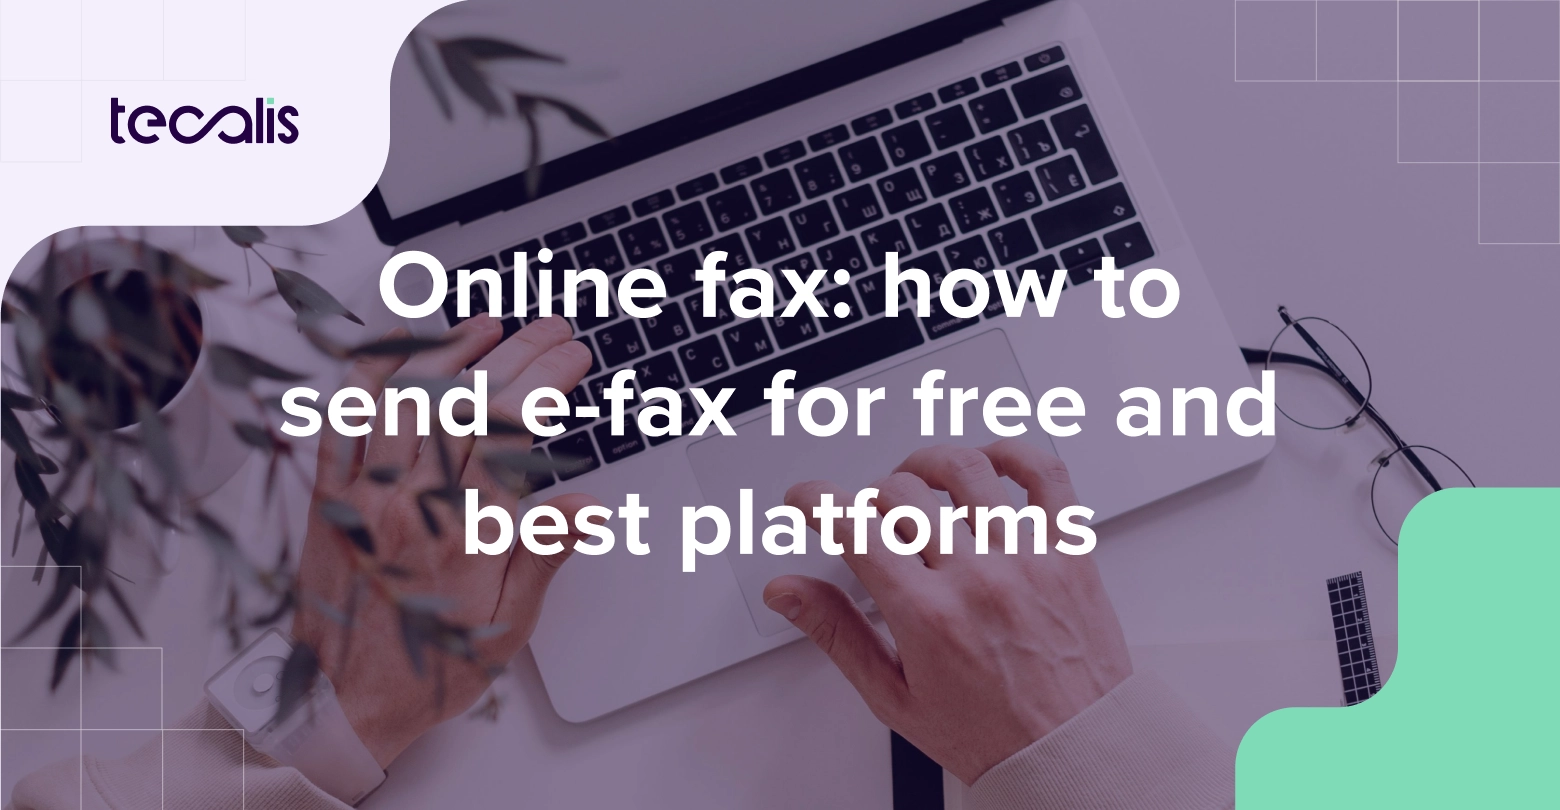 Online fax: send an e-fax for free and best platforms